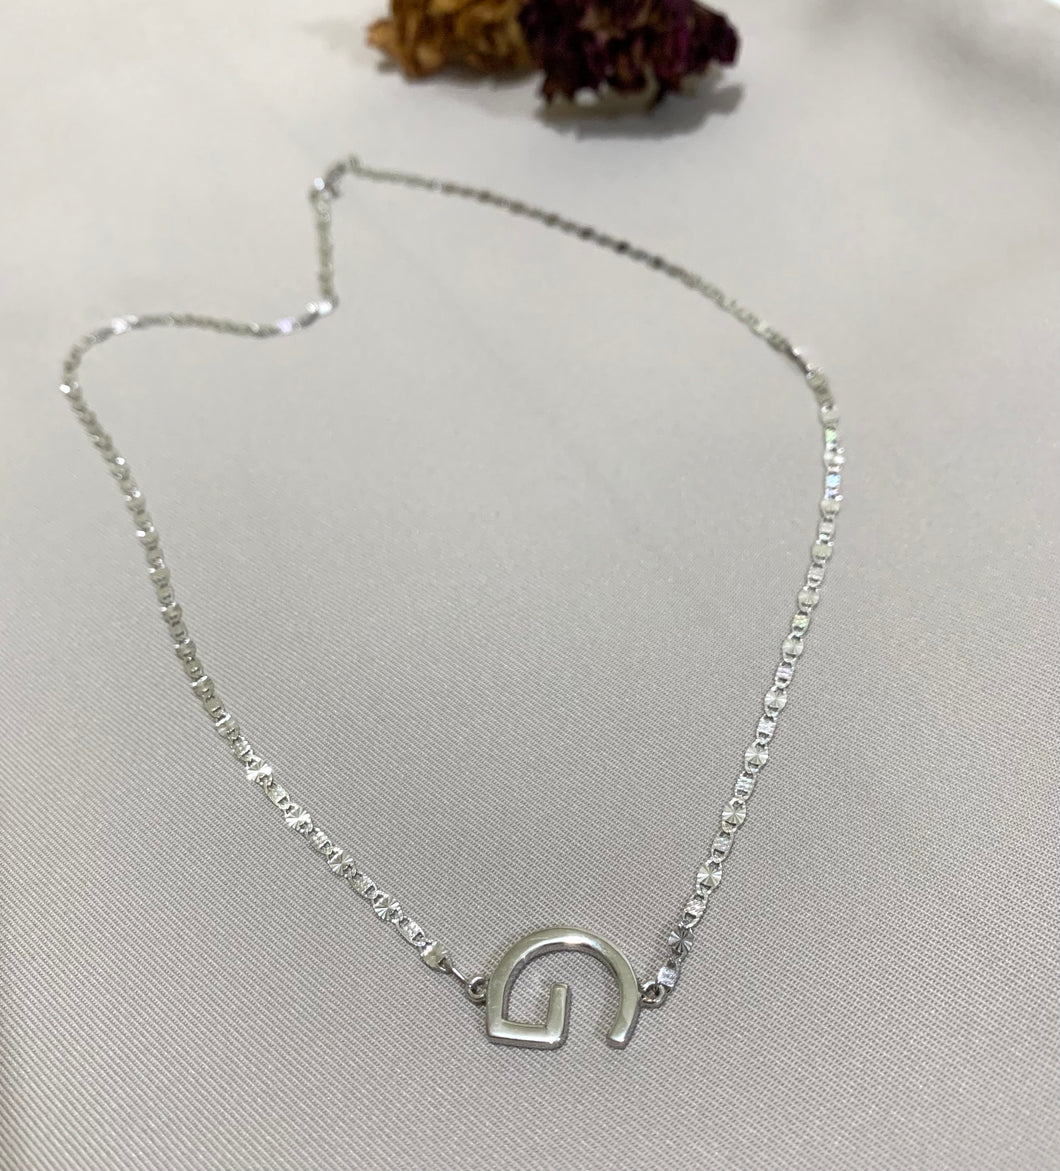 White gold G initial sideways necklace.